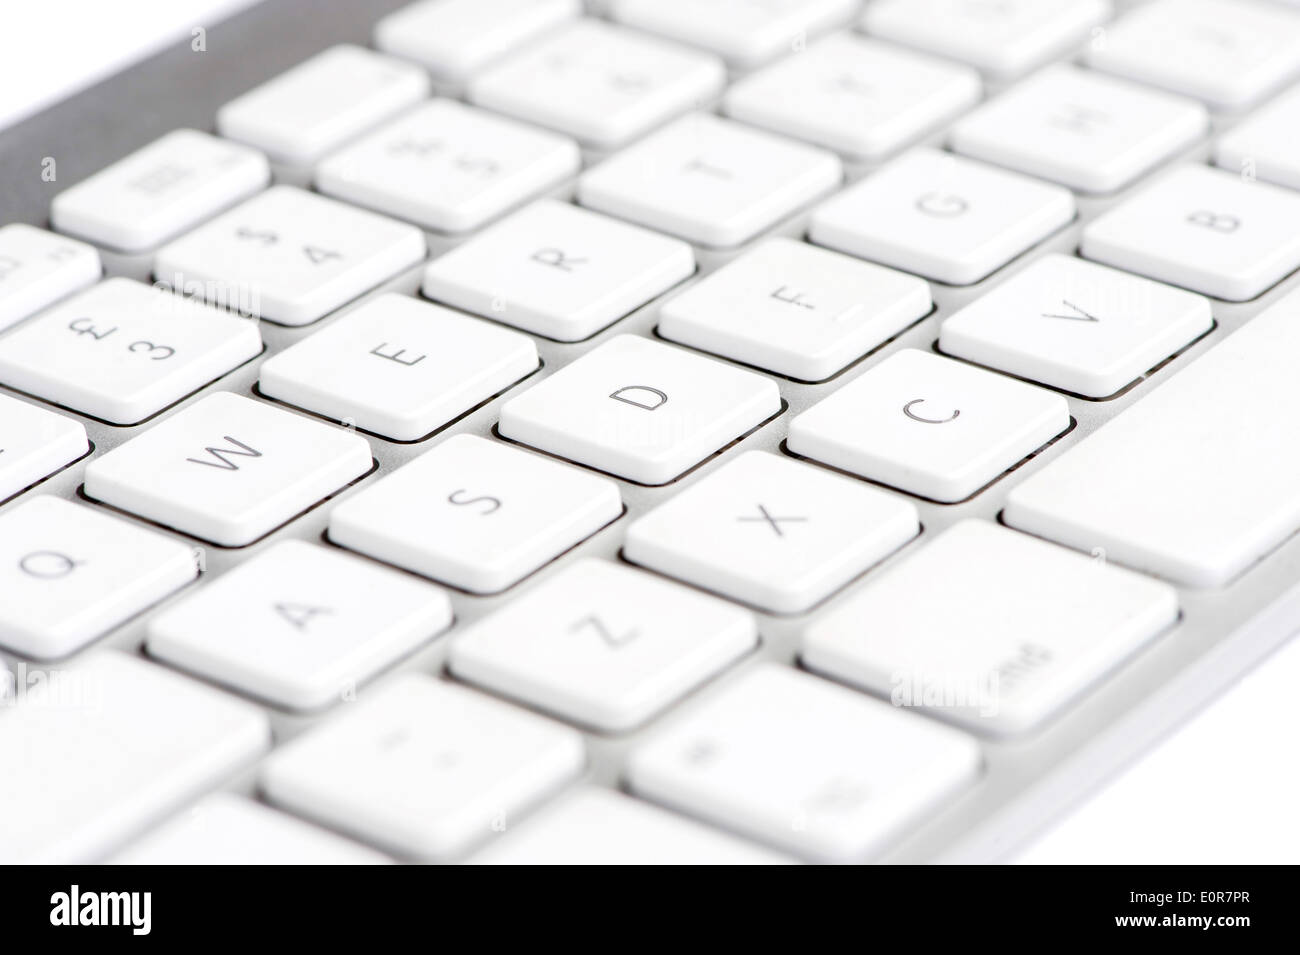 Apple mac white Keyboard focused on the letter D Stock Photo